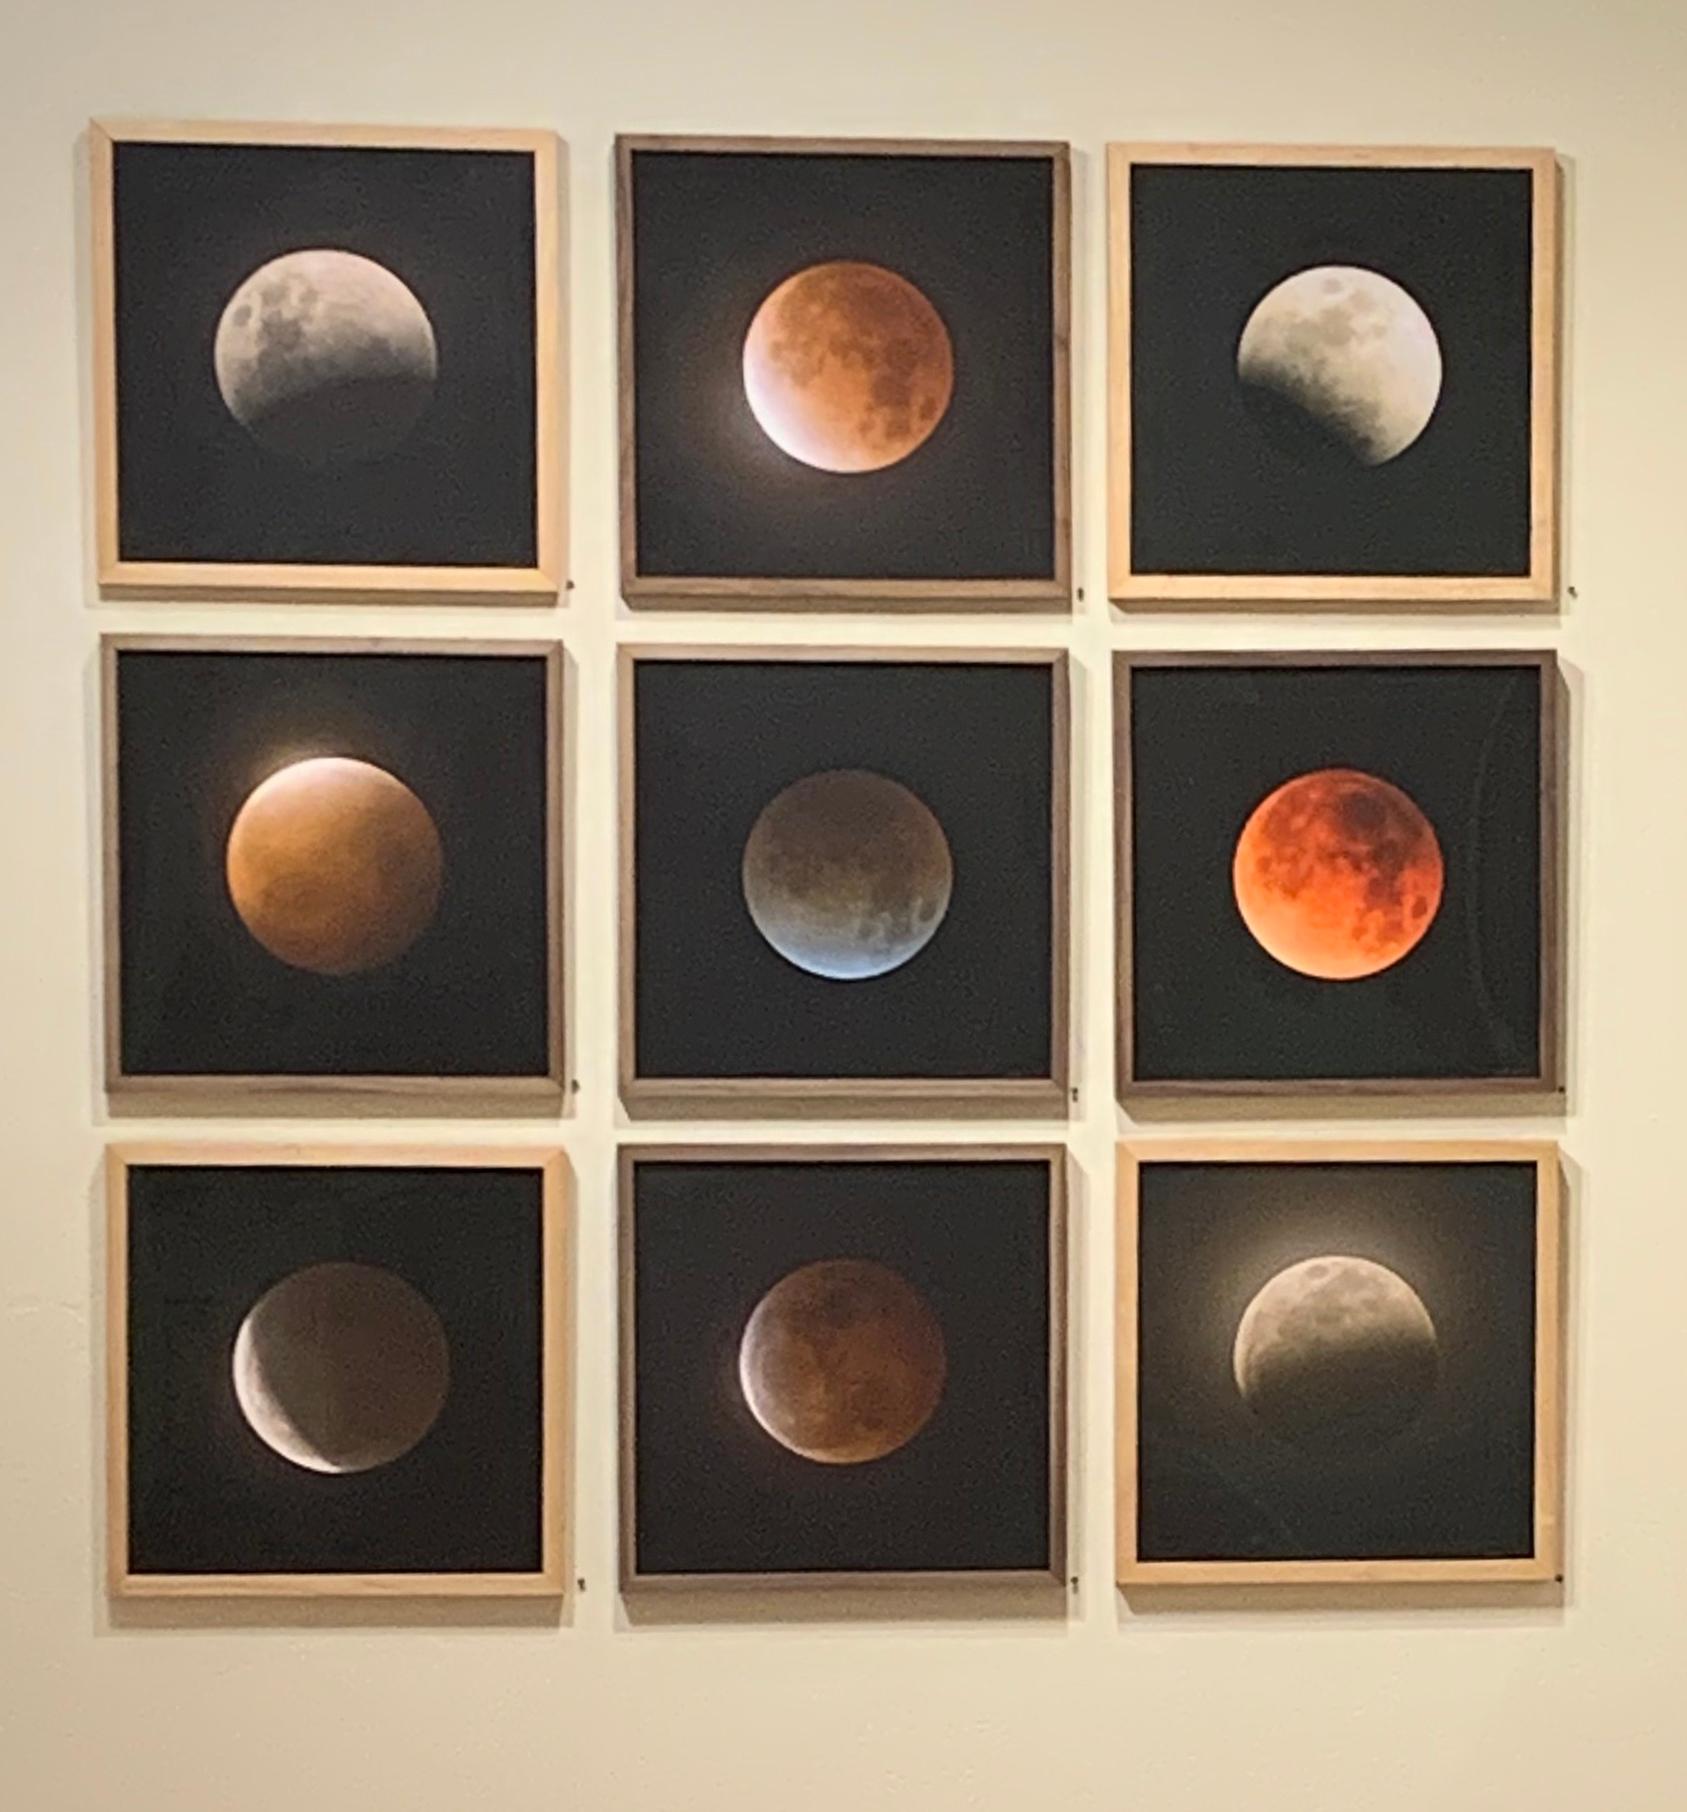 Nine Lunar Eclipses (F) - Photograph by Kate Breakey